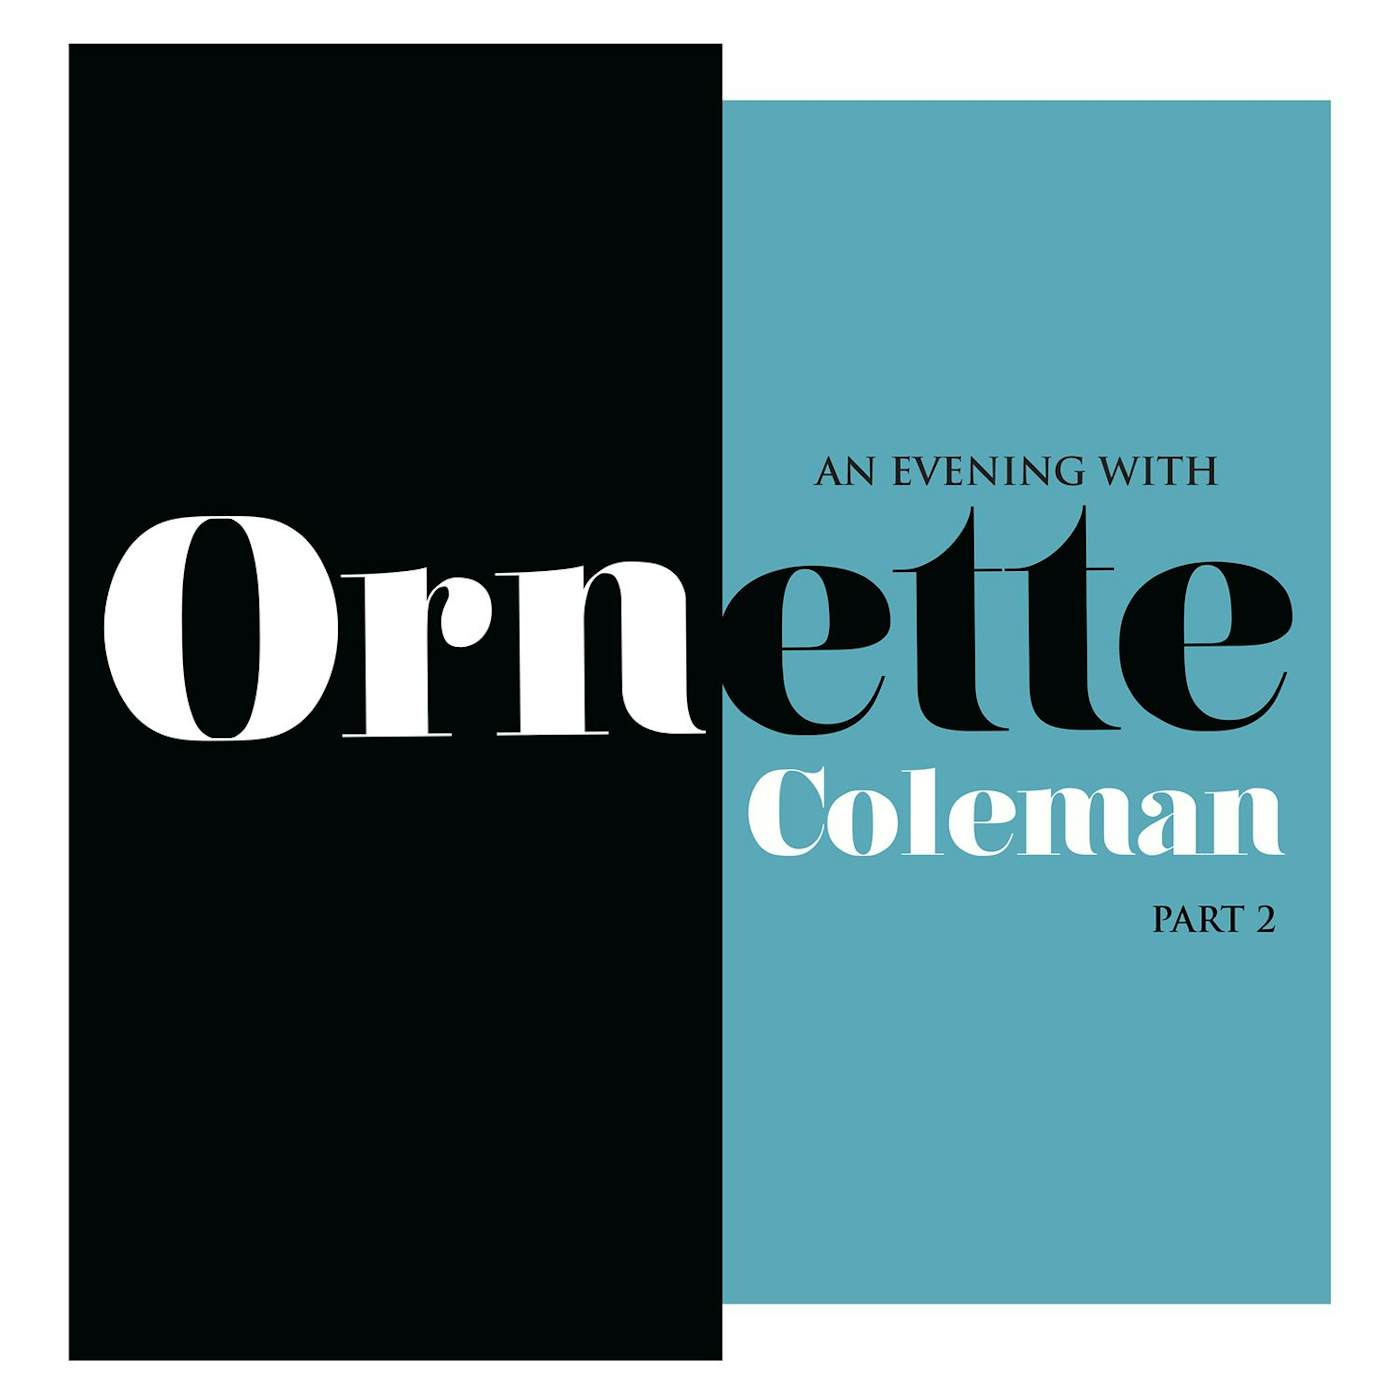 AN EVENING WITH ORNETTE COLEMAN PART 2 Vinyl Record